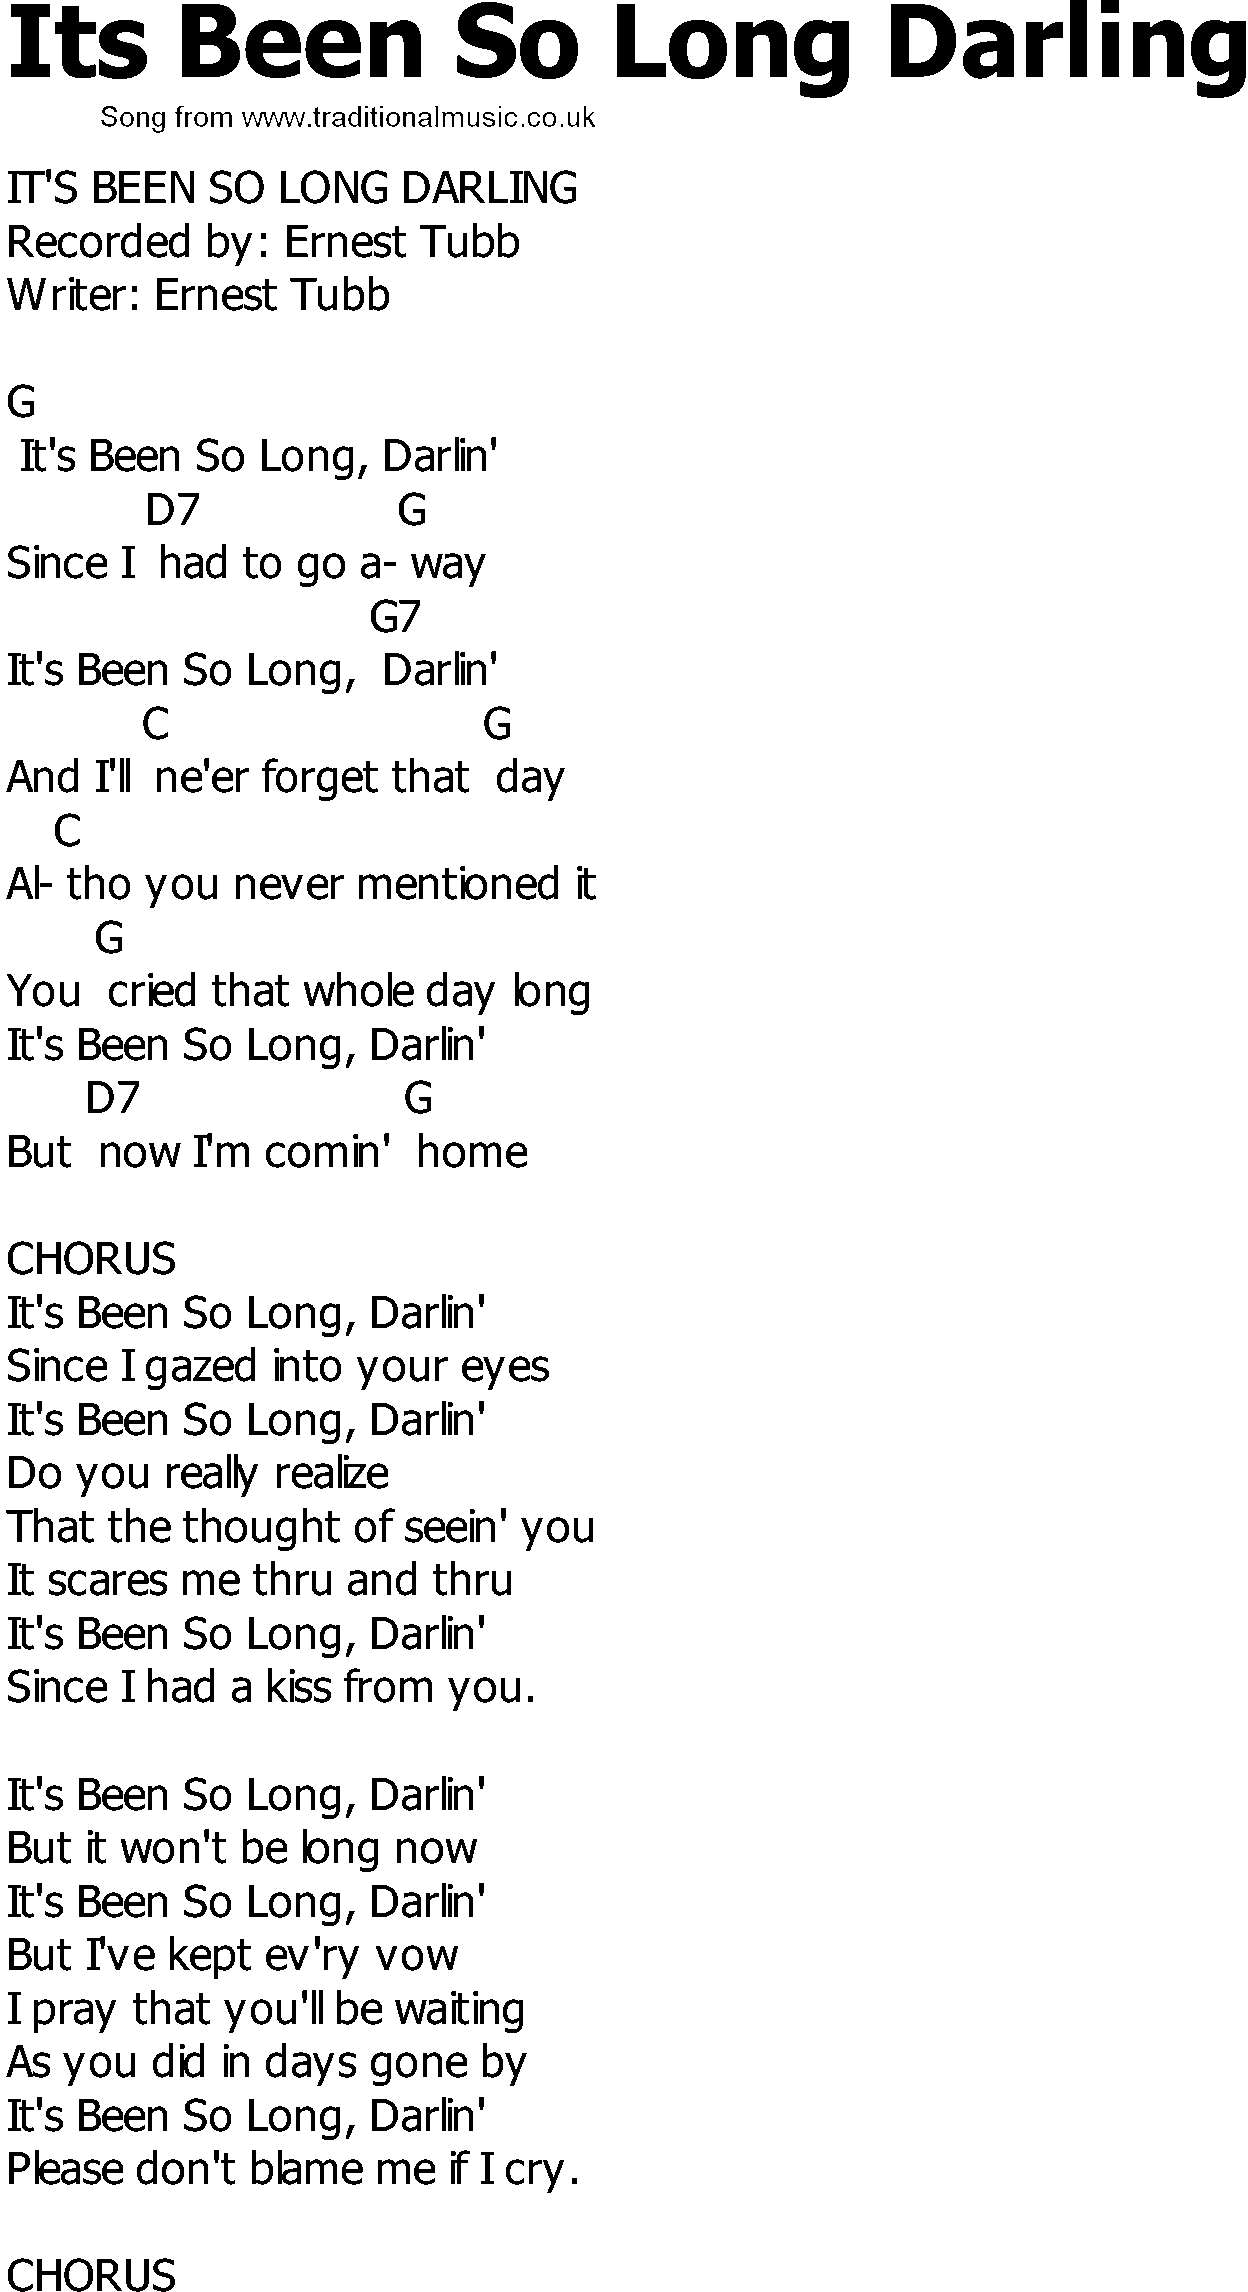 Old Country song lyrics with chords - Its Been So Long Darling